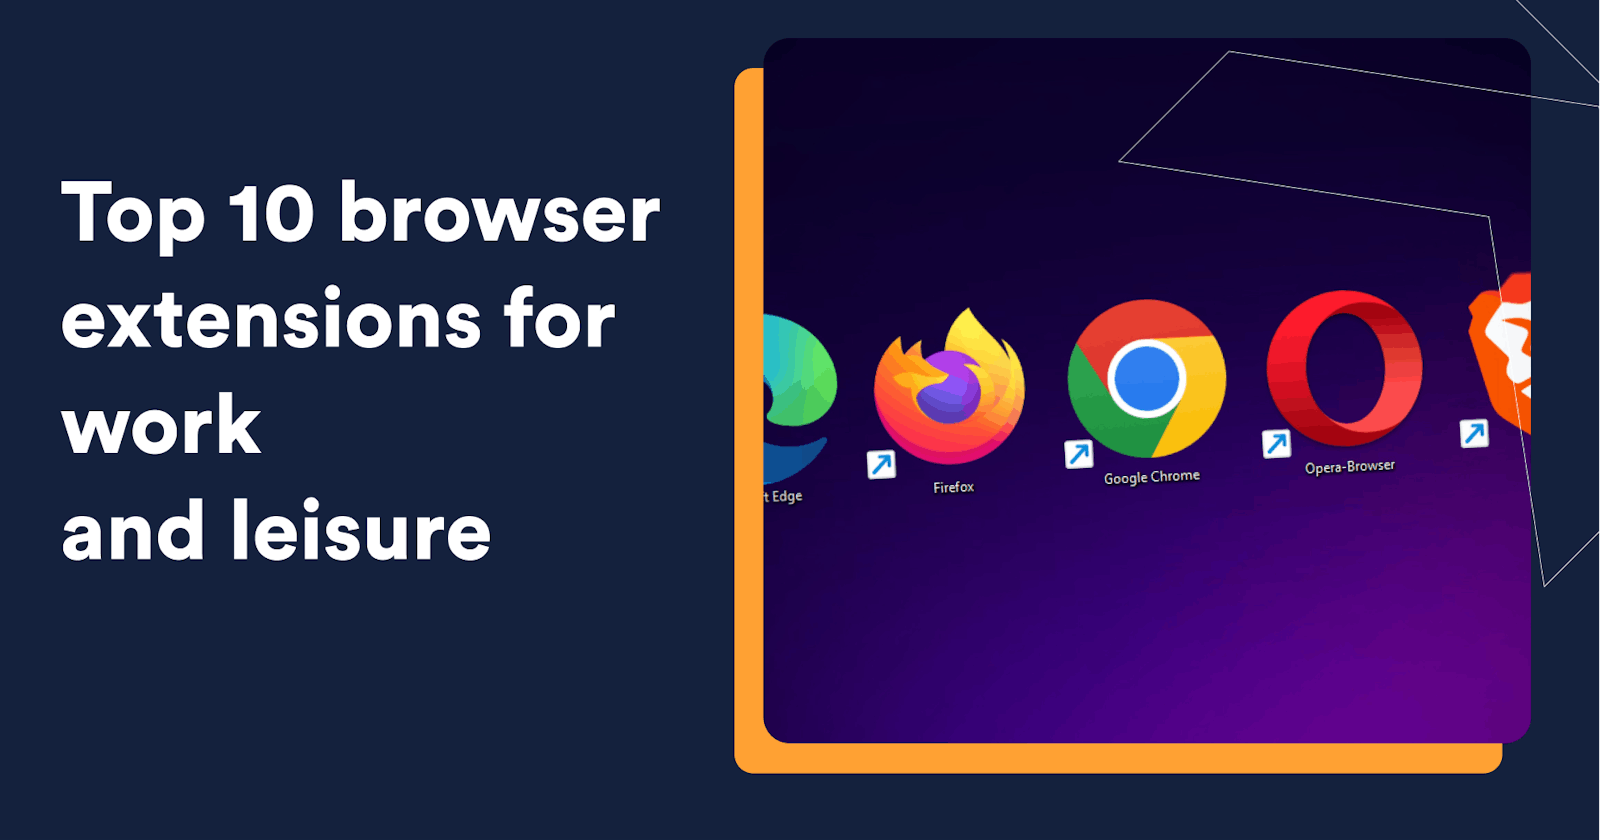 Top 10 browser extensions for work and leisure